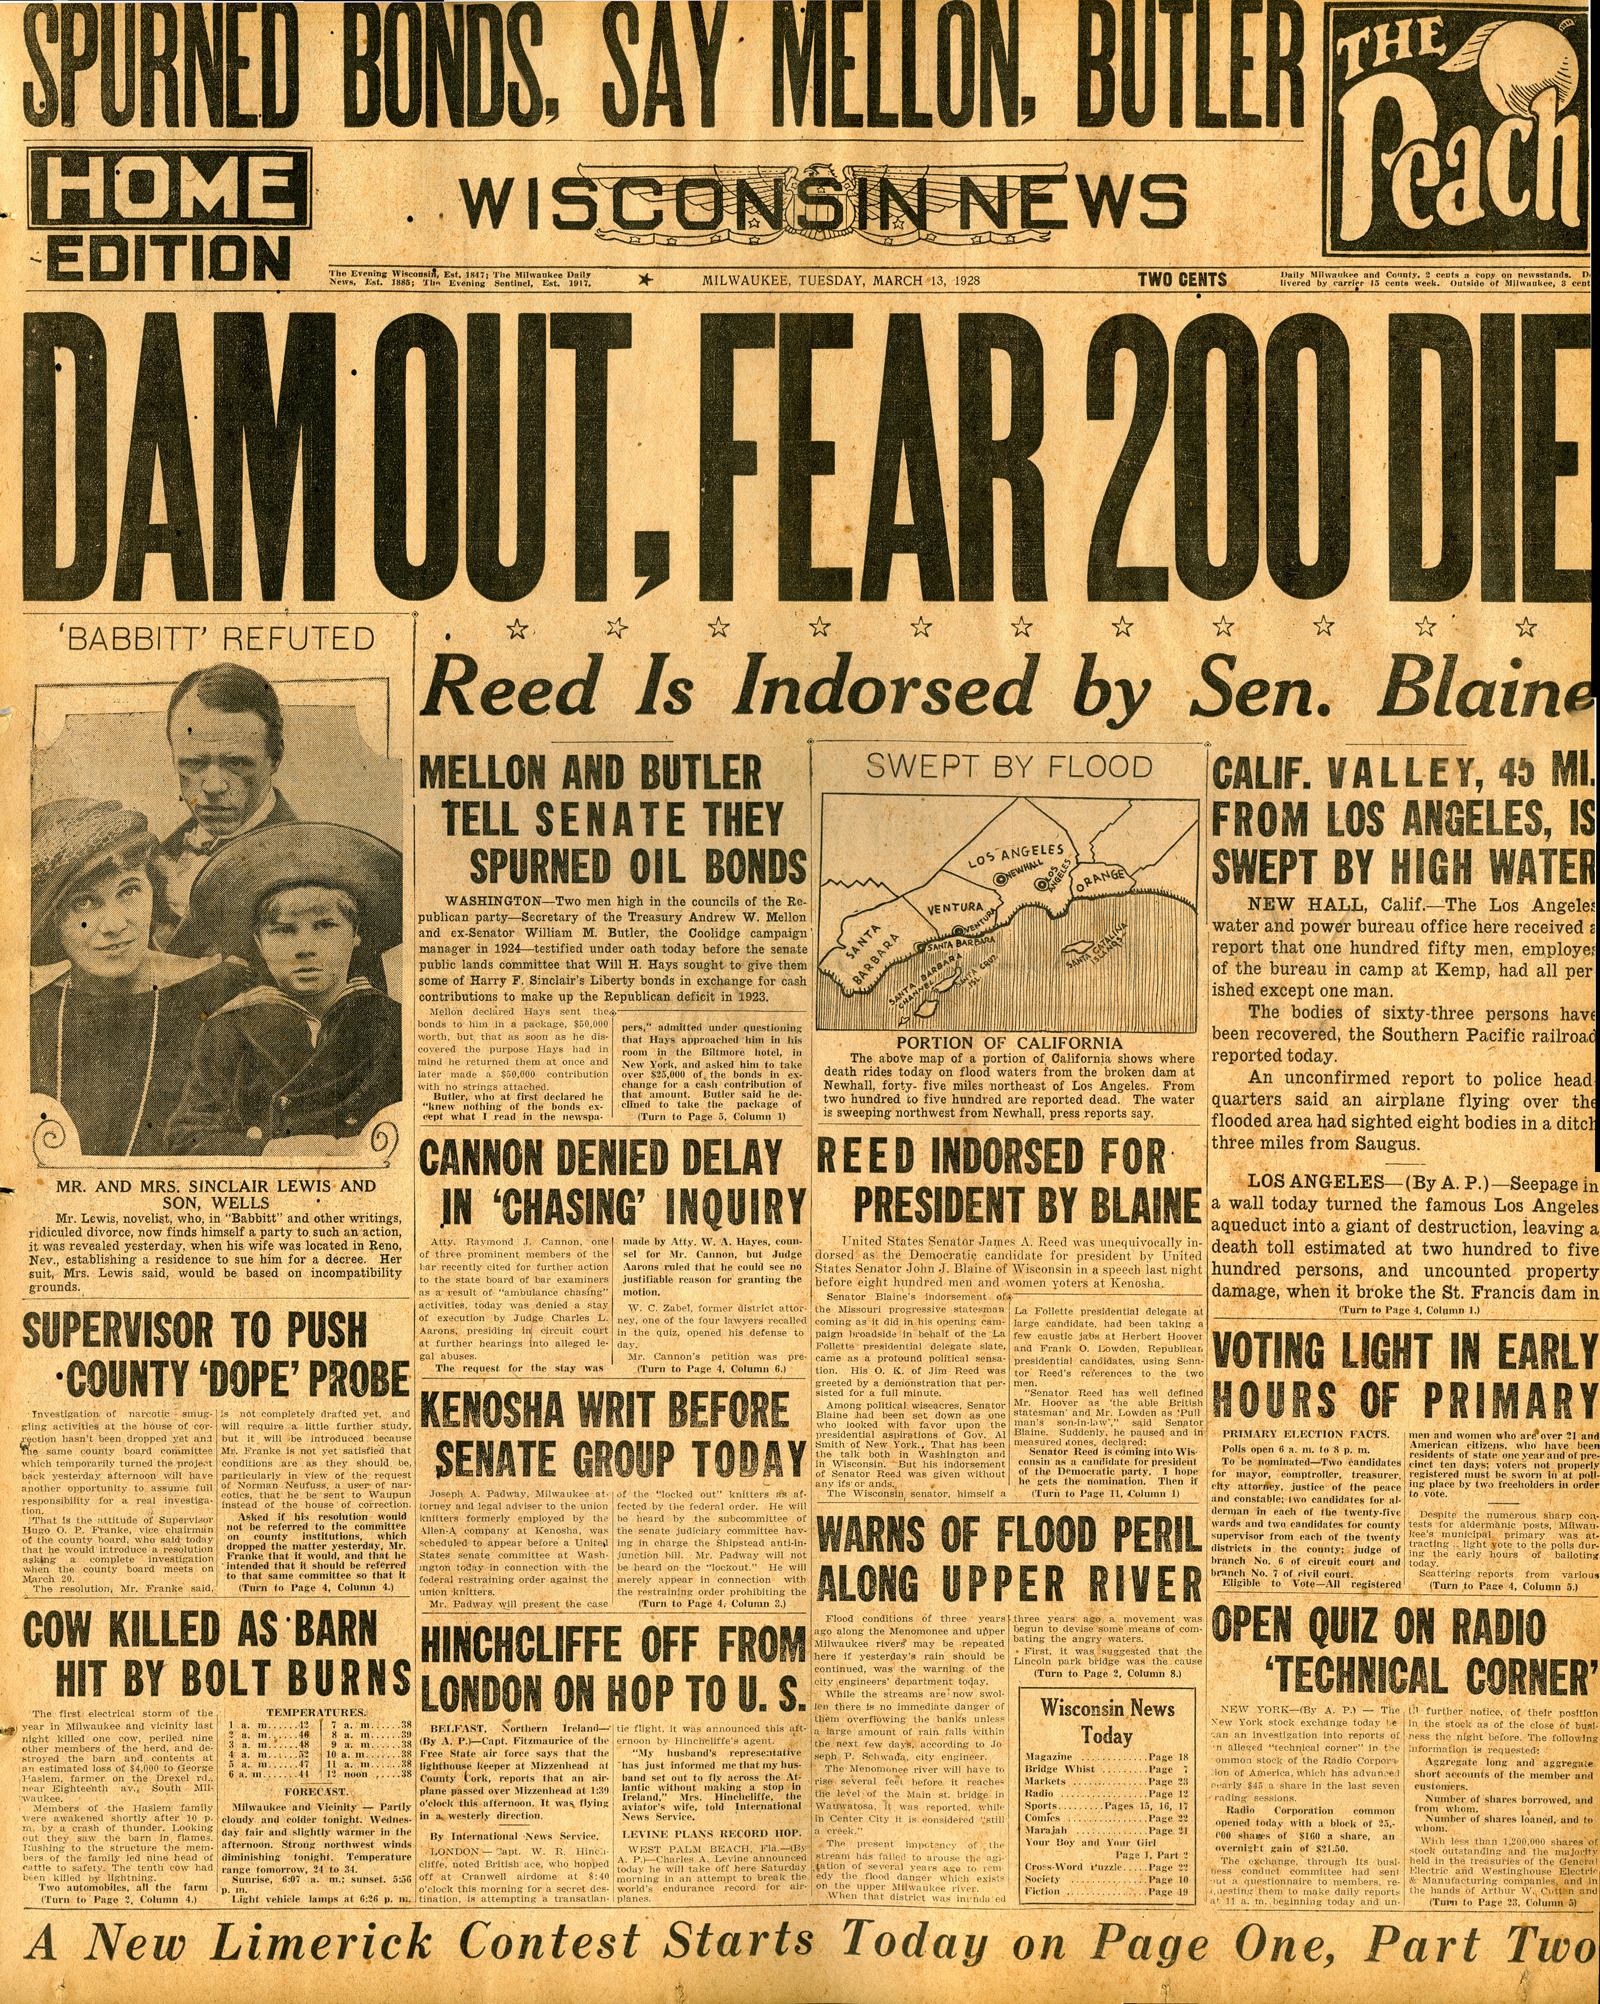 Newspapers of the St. Francis Dam Disaster.

WISCONSIN NEWS (NEWSPAPER),

TUESDAY, MARCH 13, 1928